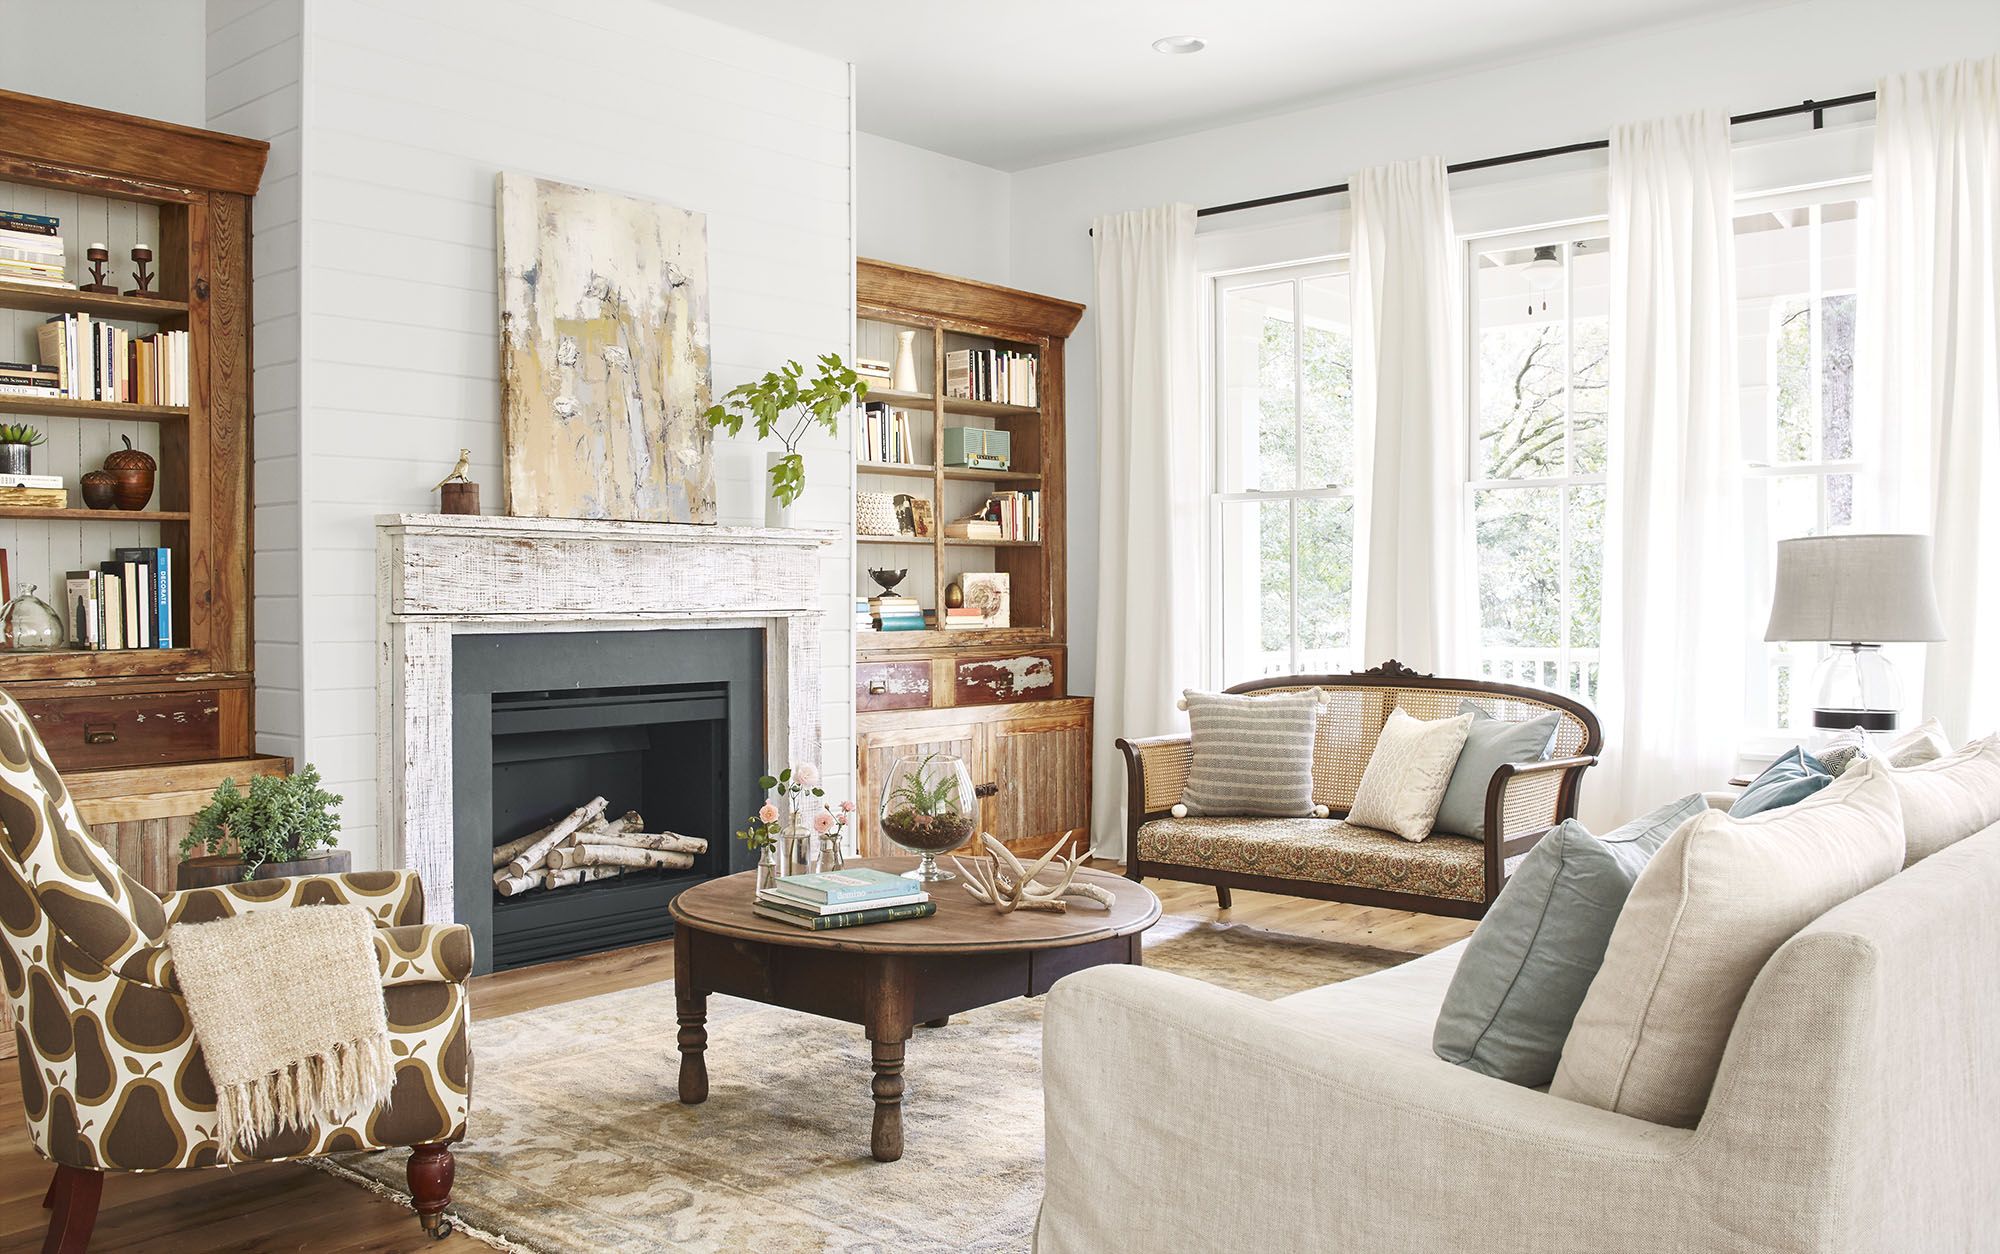 6 Best Feng Shui Living Room Ideas, According to Experts